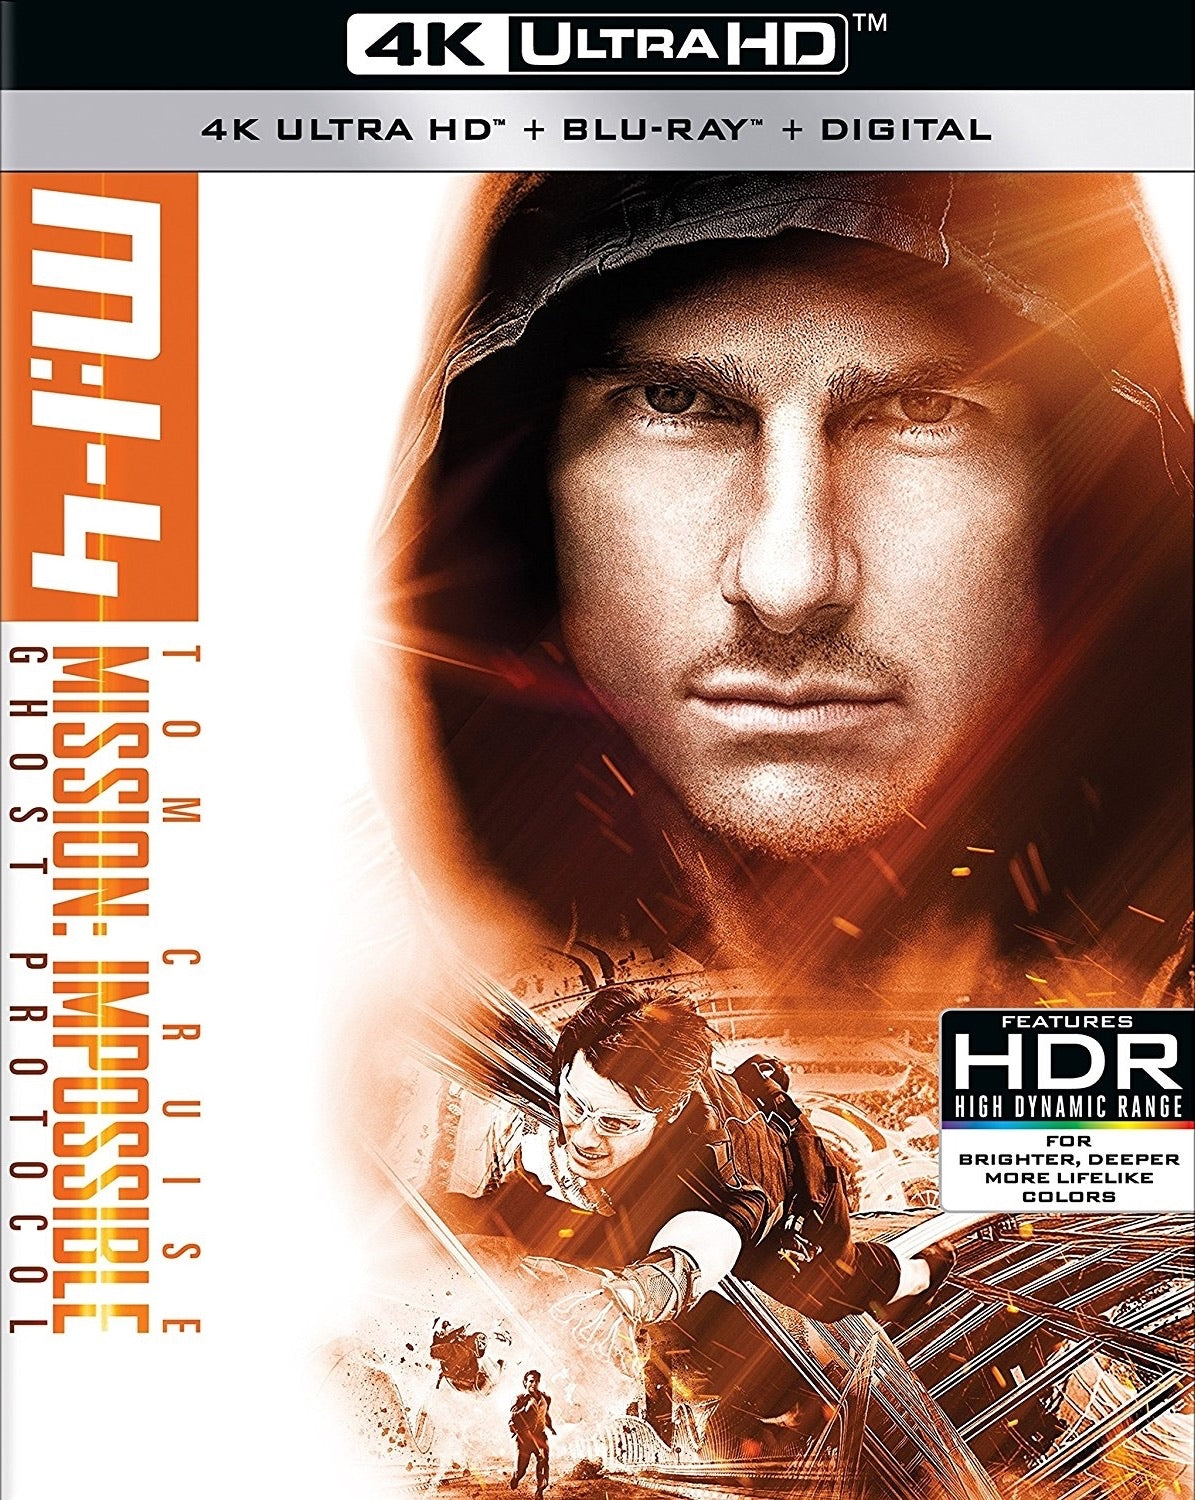 Mission: Impossible - Ghost Protocol (2011) Vudu 4K redemption only